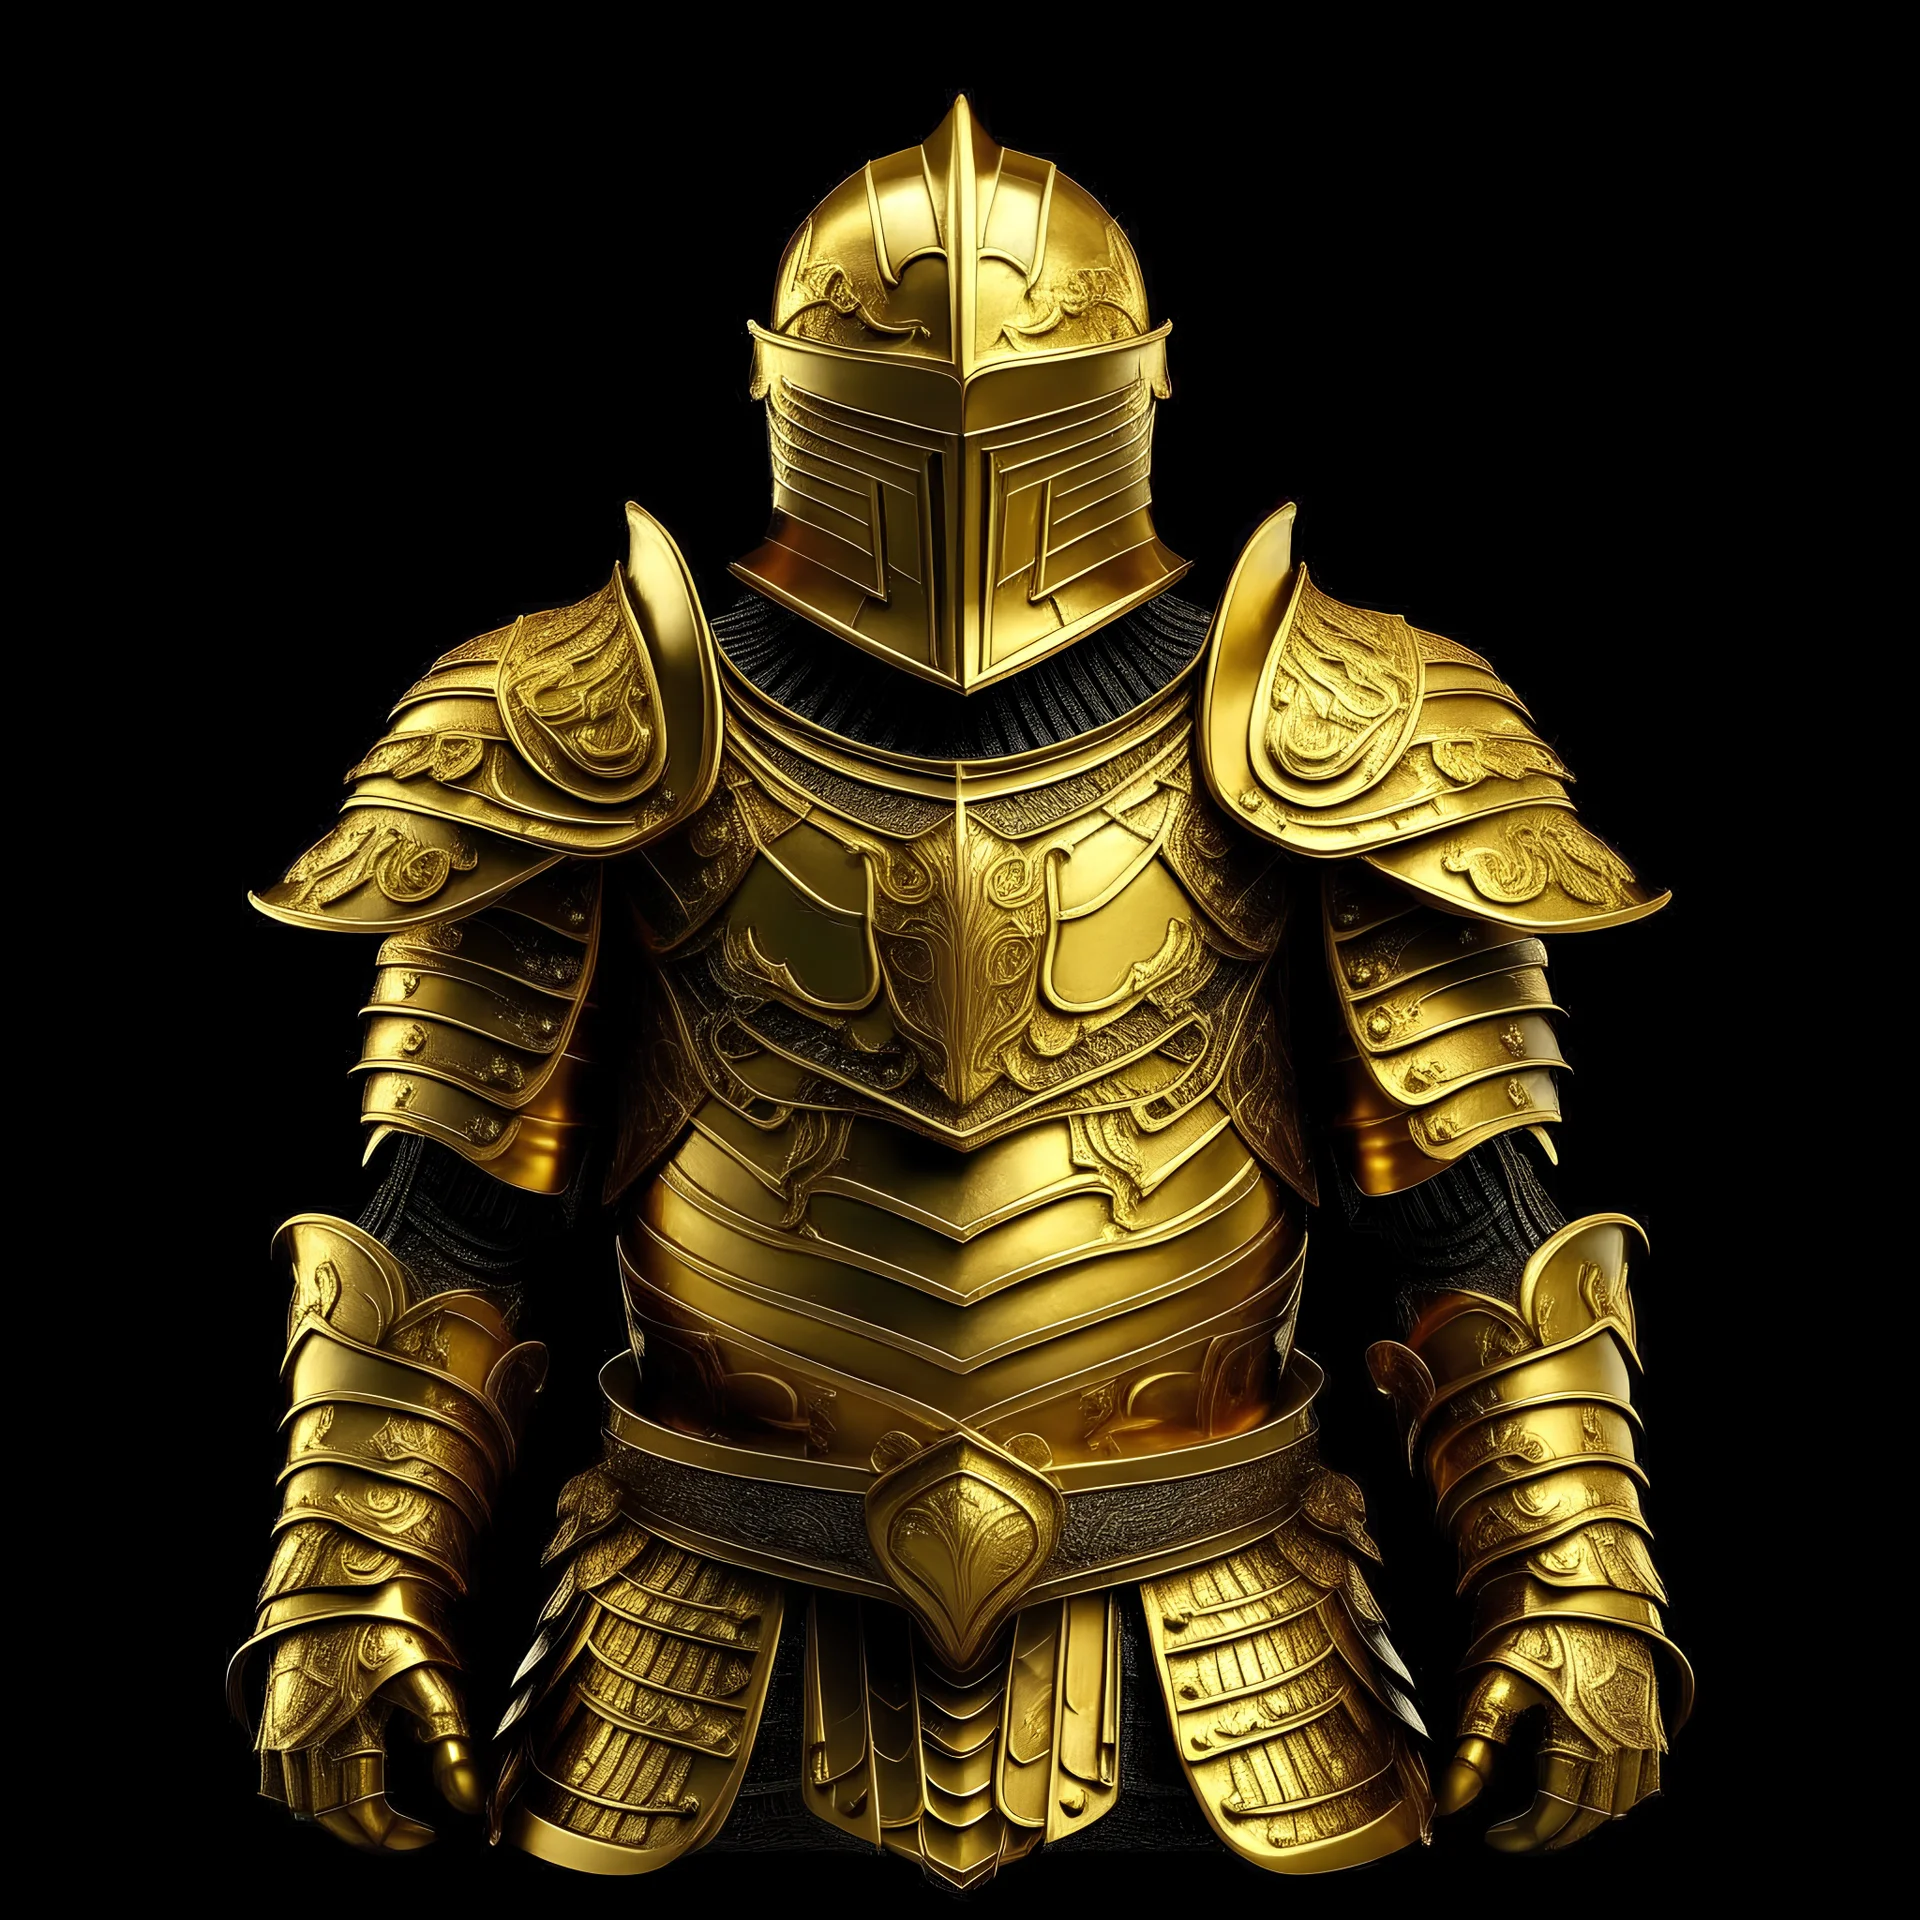 Golden armor with a full interior and a fire or black background